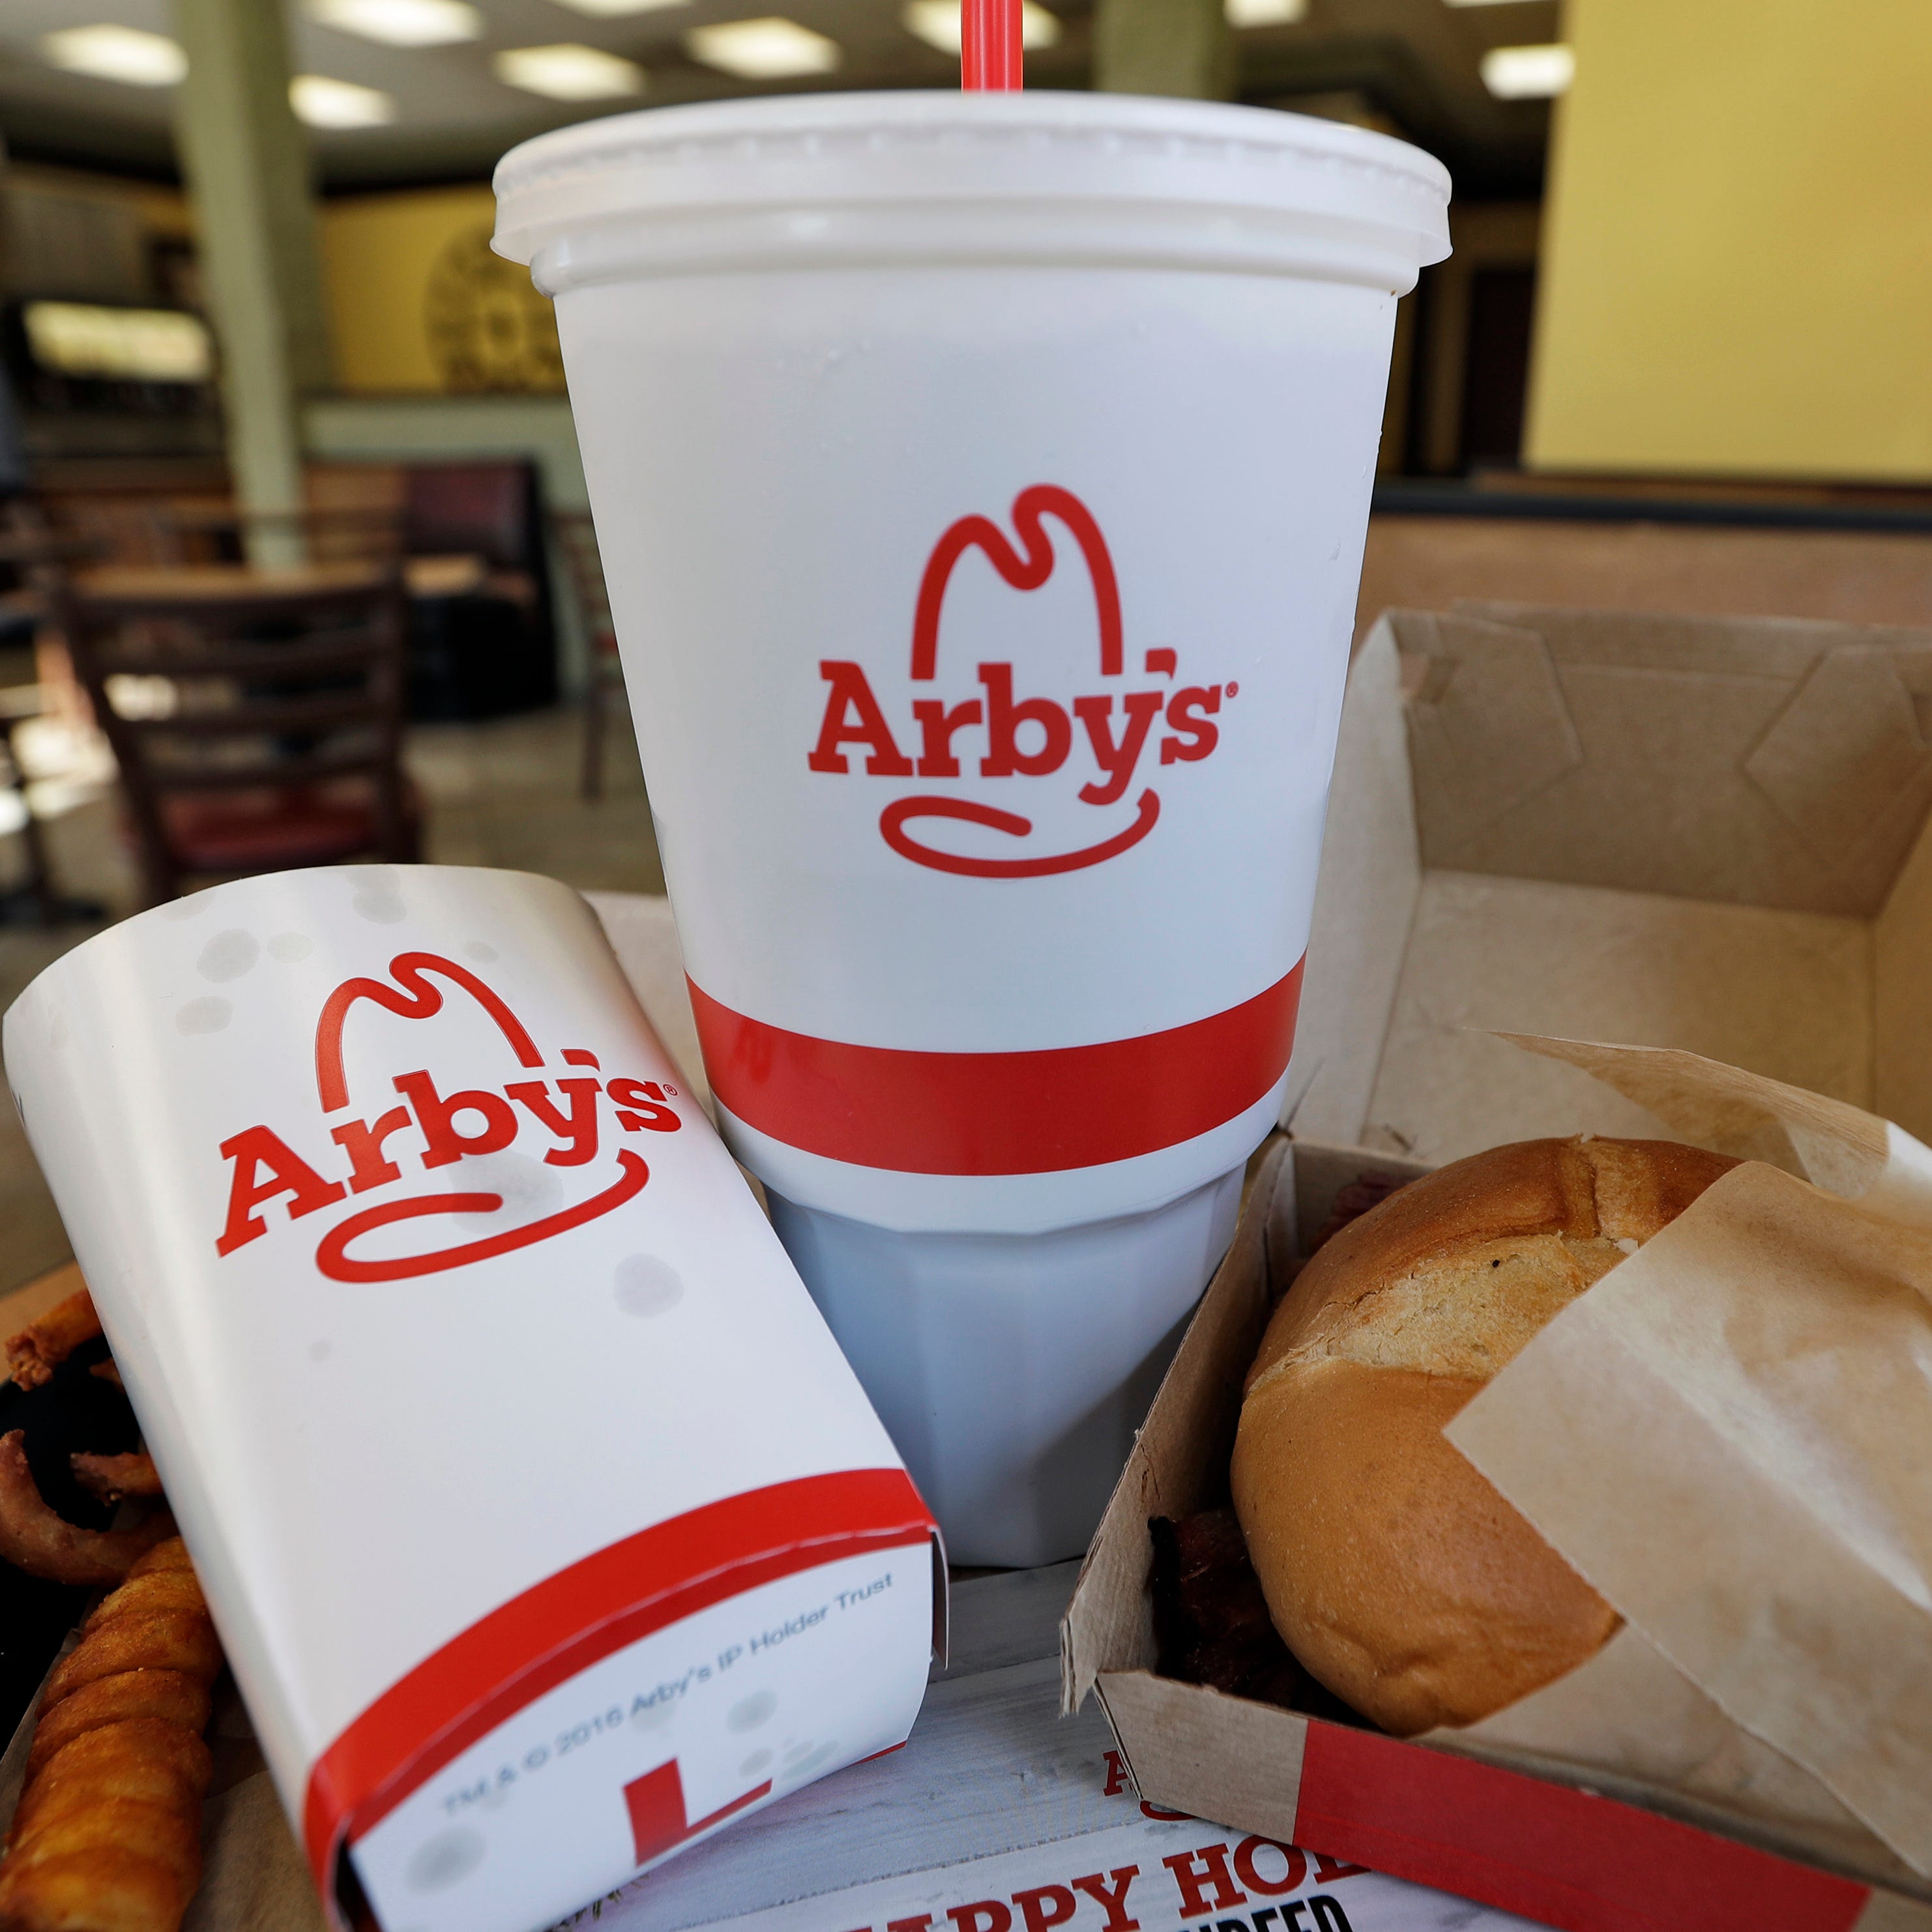 The Arby's fast-food chain and franchise owner are being sued by the children of Nguyet Le, 63, who died May 11. Her body, police said, was found in a locked Arby's walk-in freezer at a New Iberia, La., store.